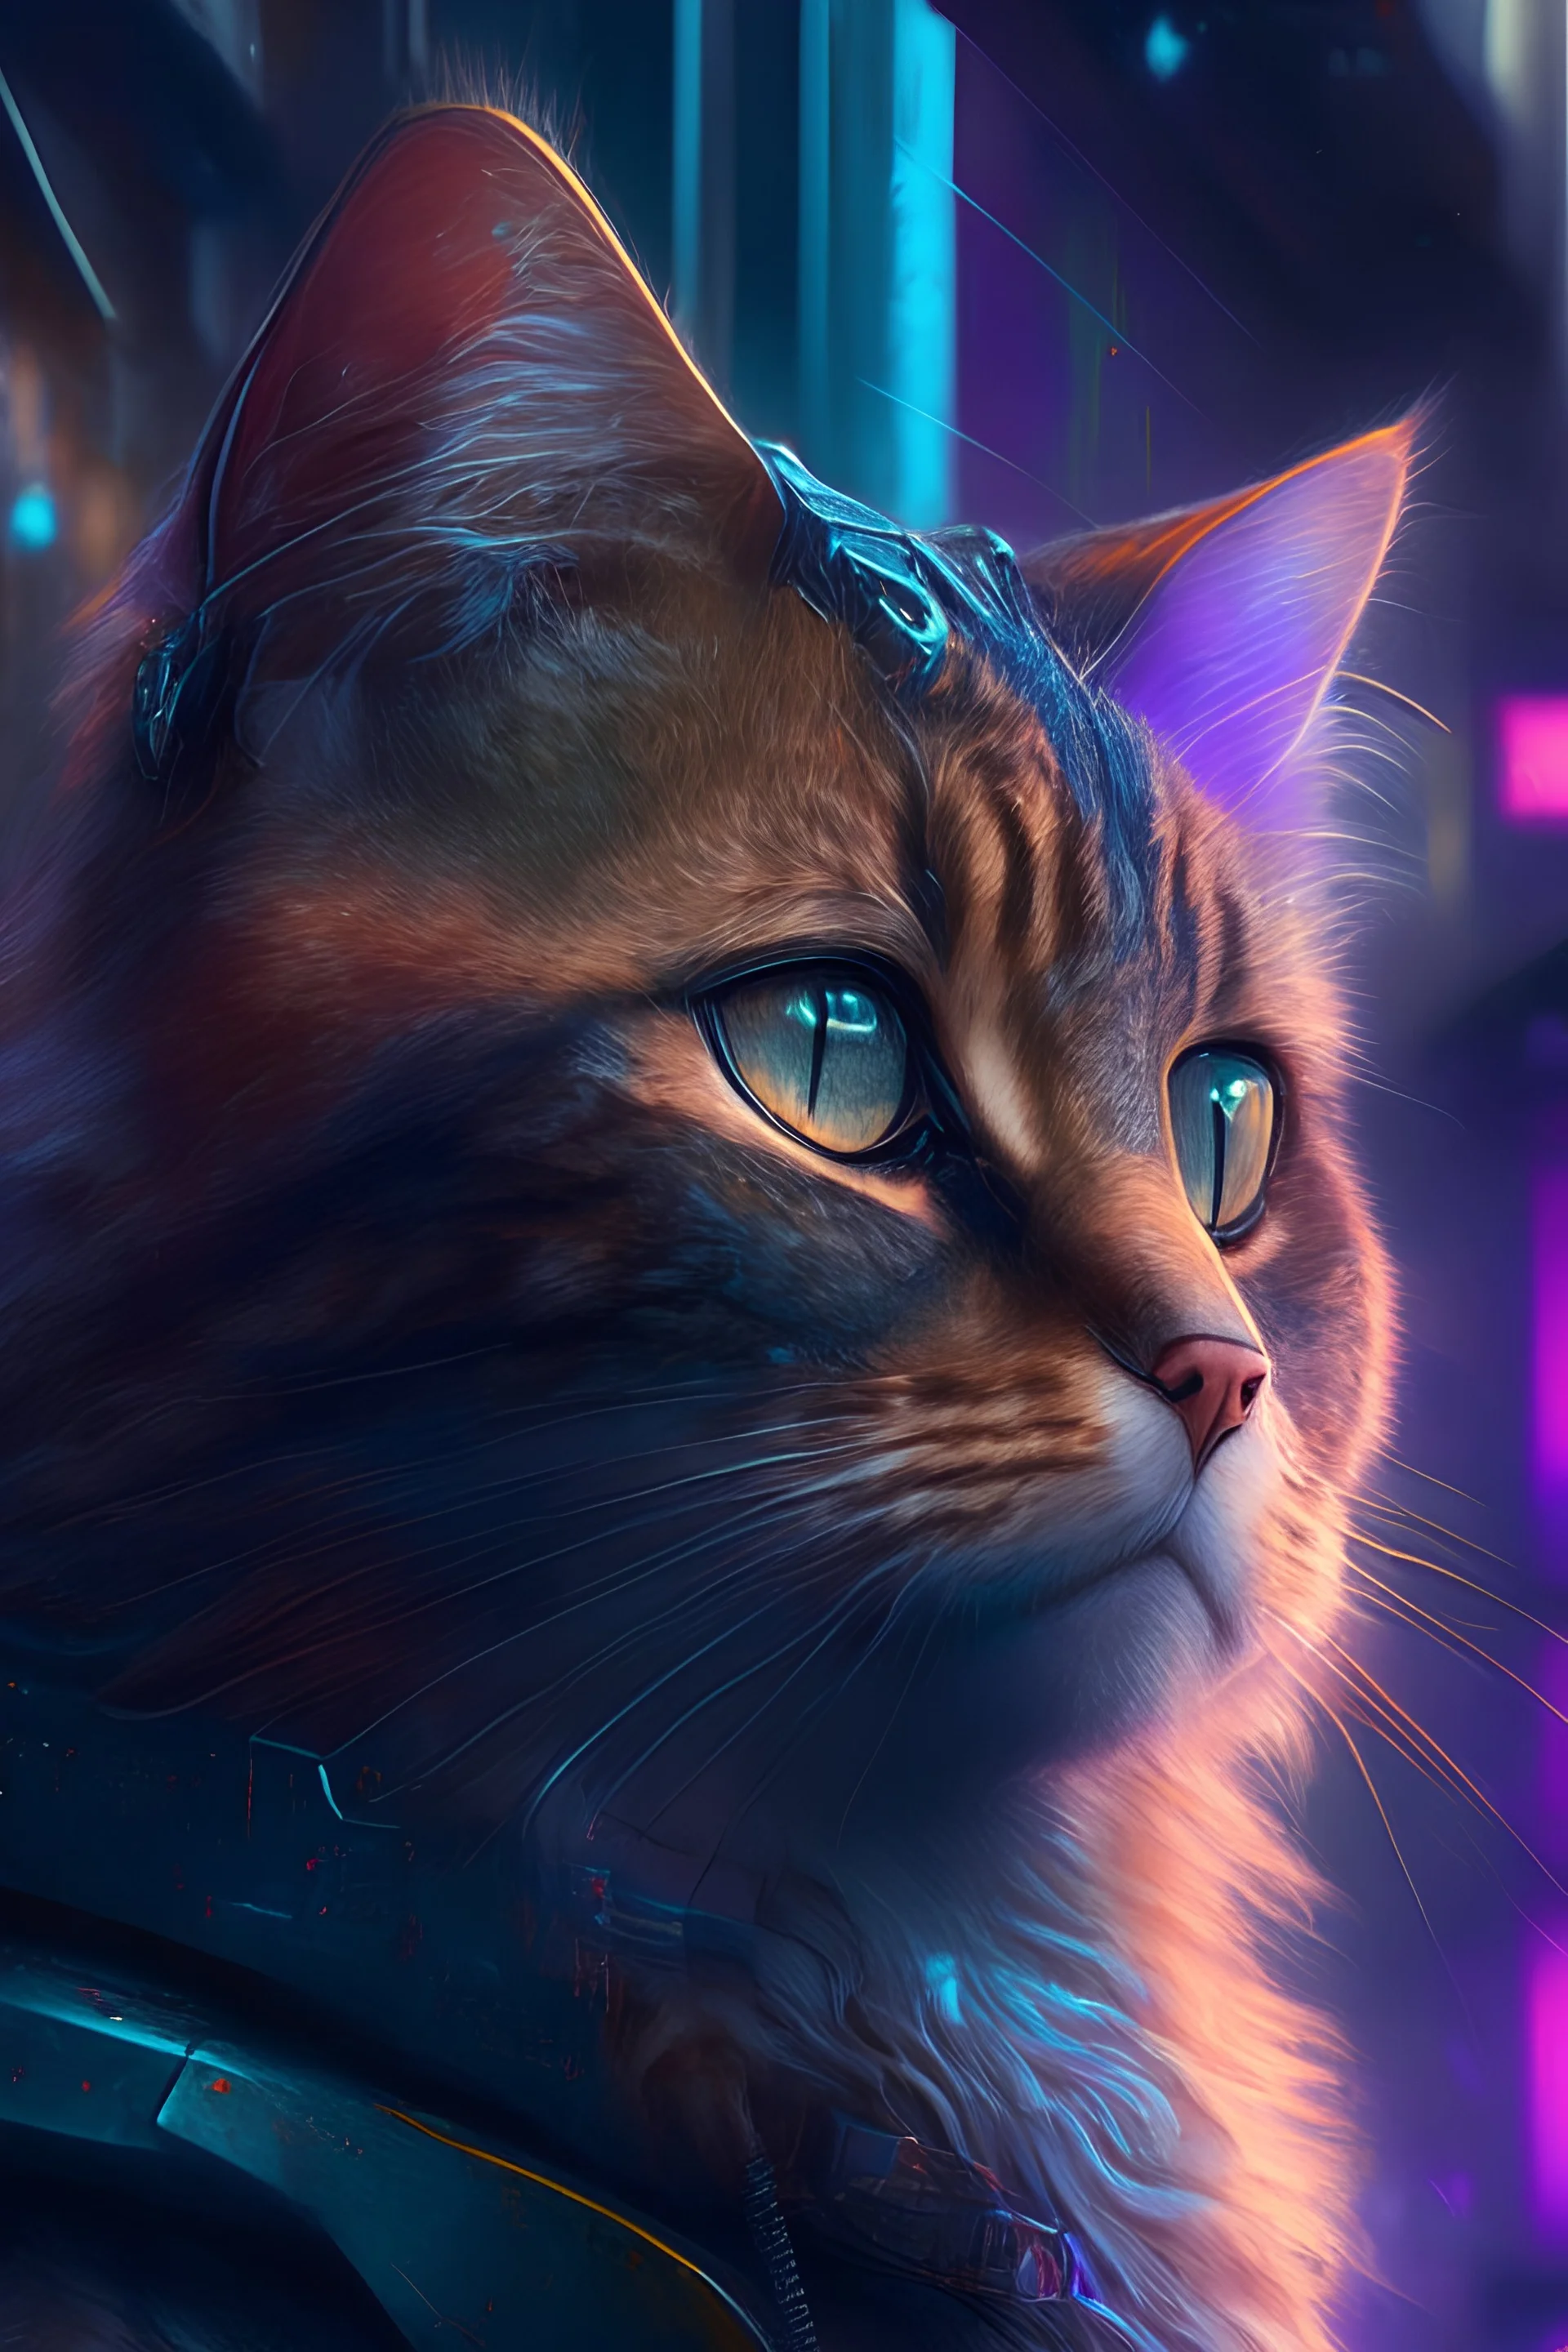 A photorealistic painting of a cat in a cyberpunk setting